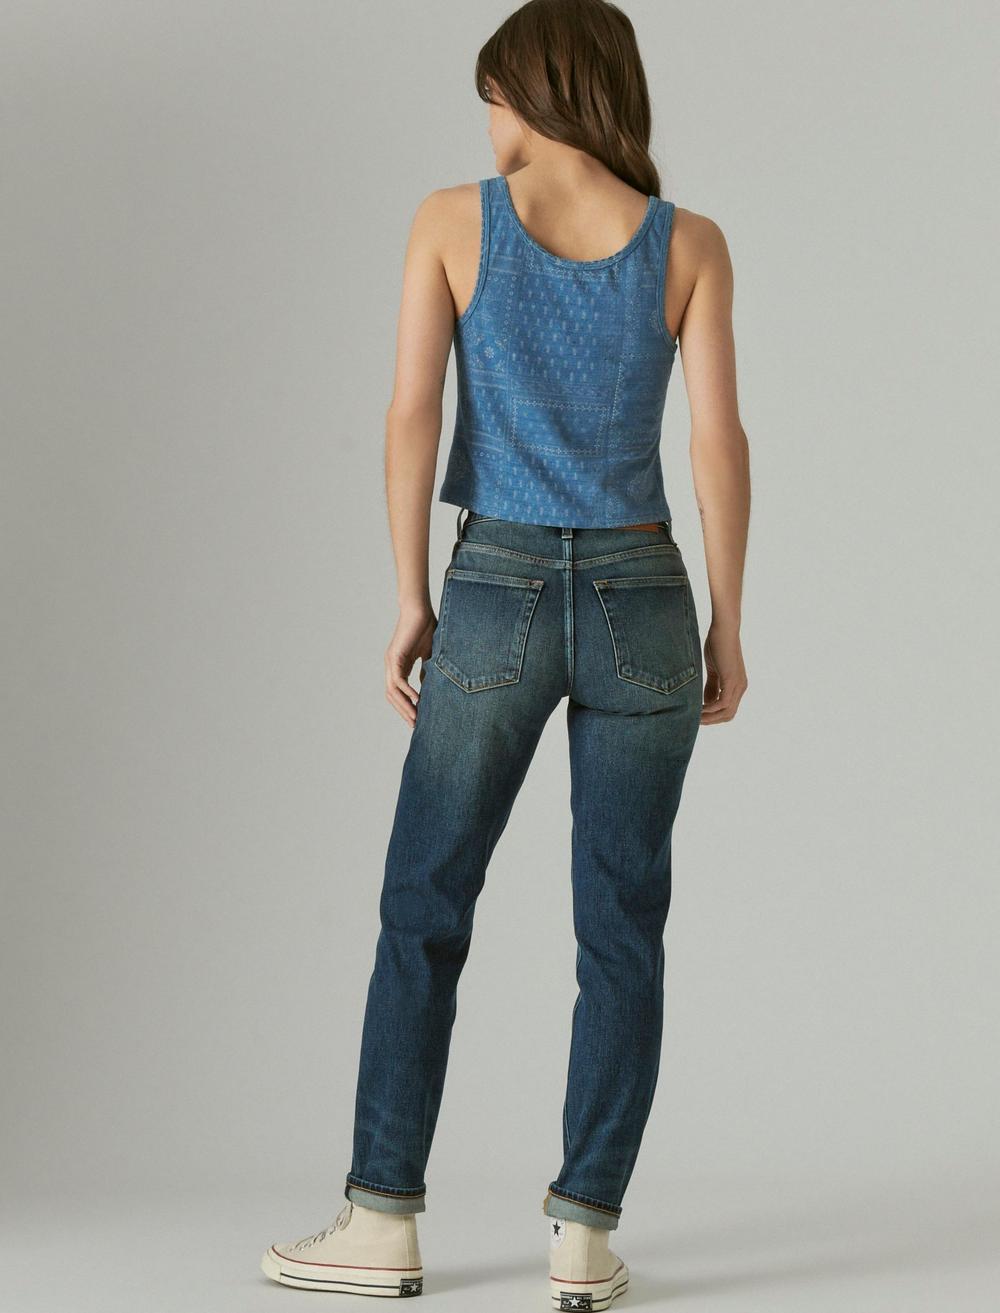 LUCKY BRAND JEANS High Rise Drew Mom Jean